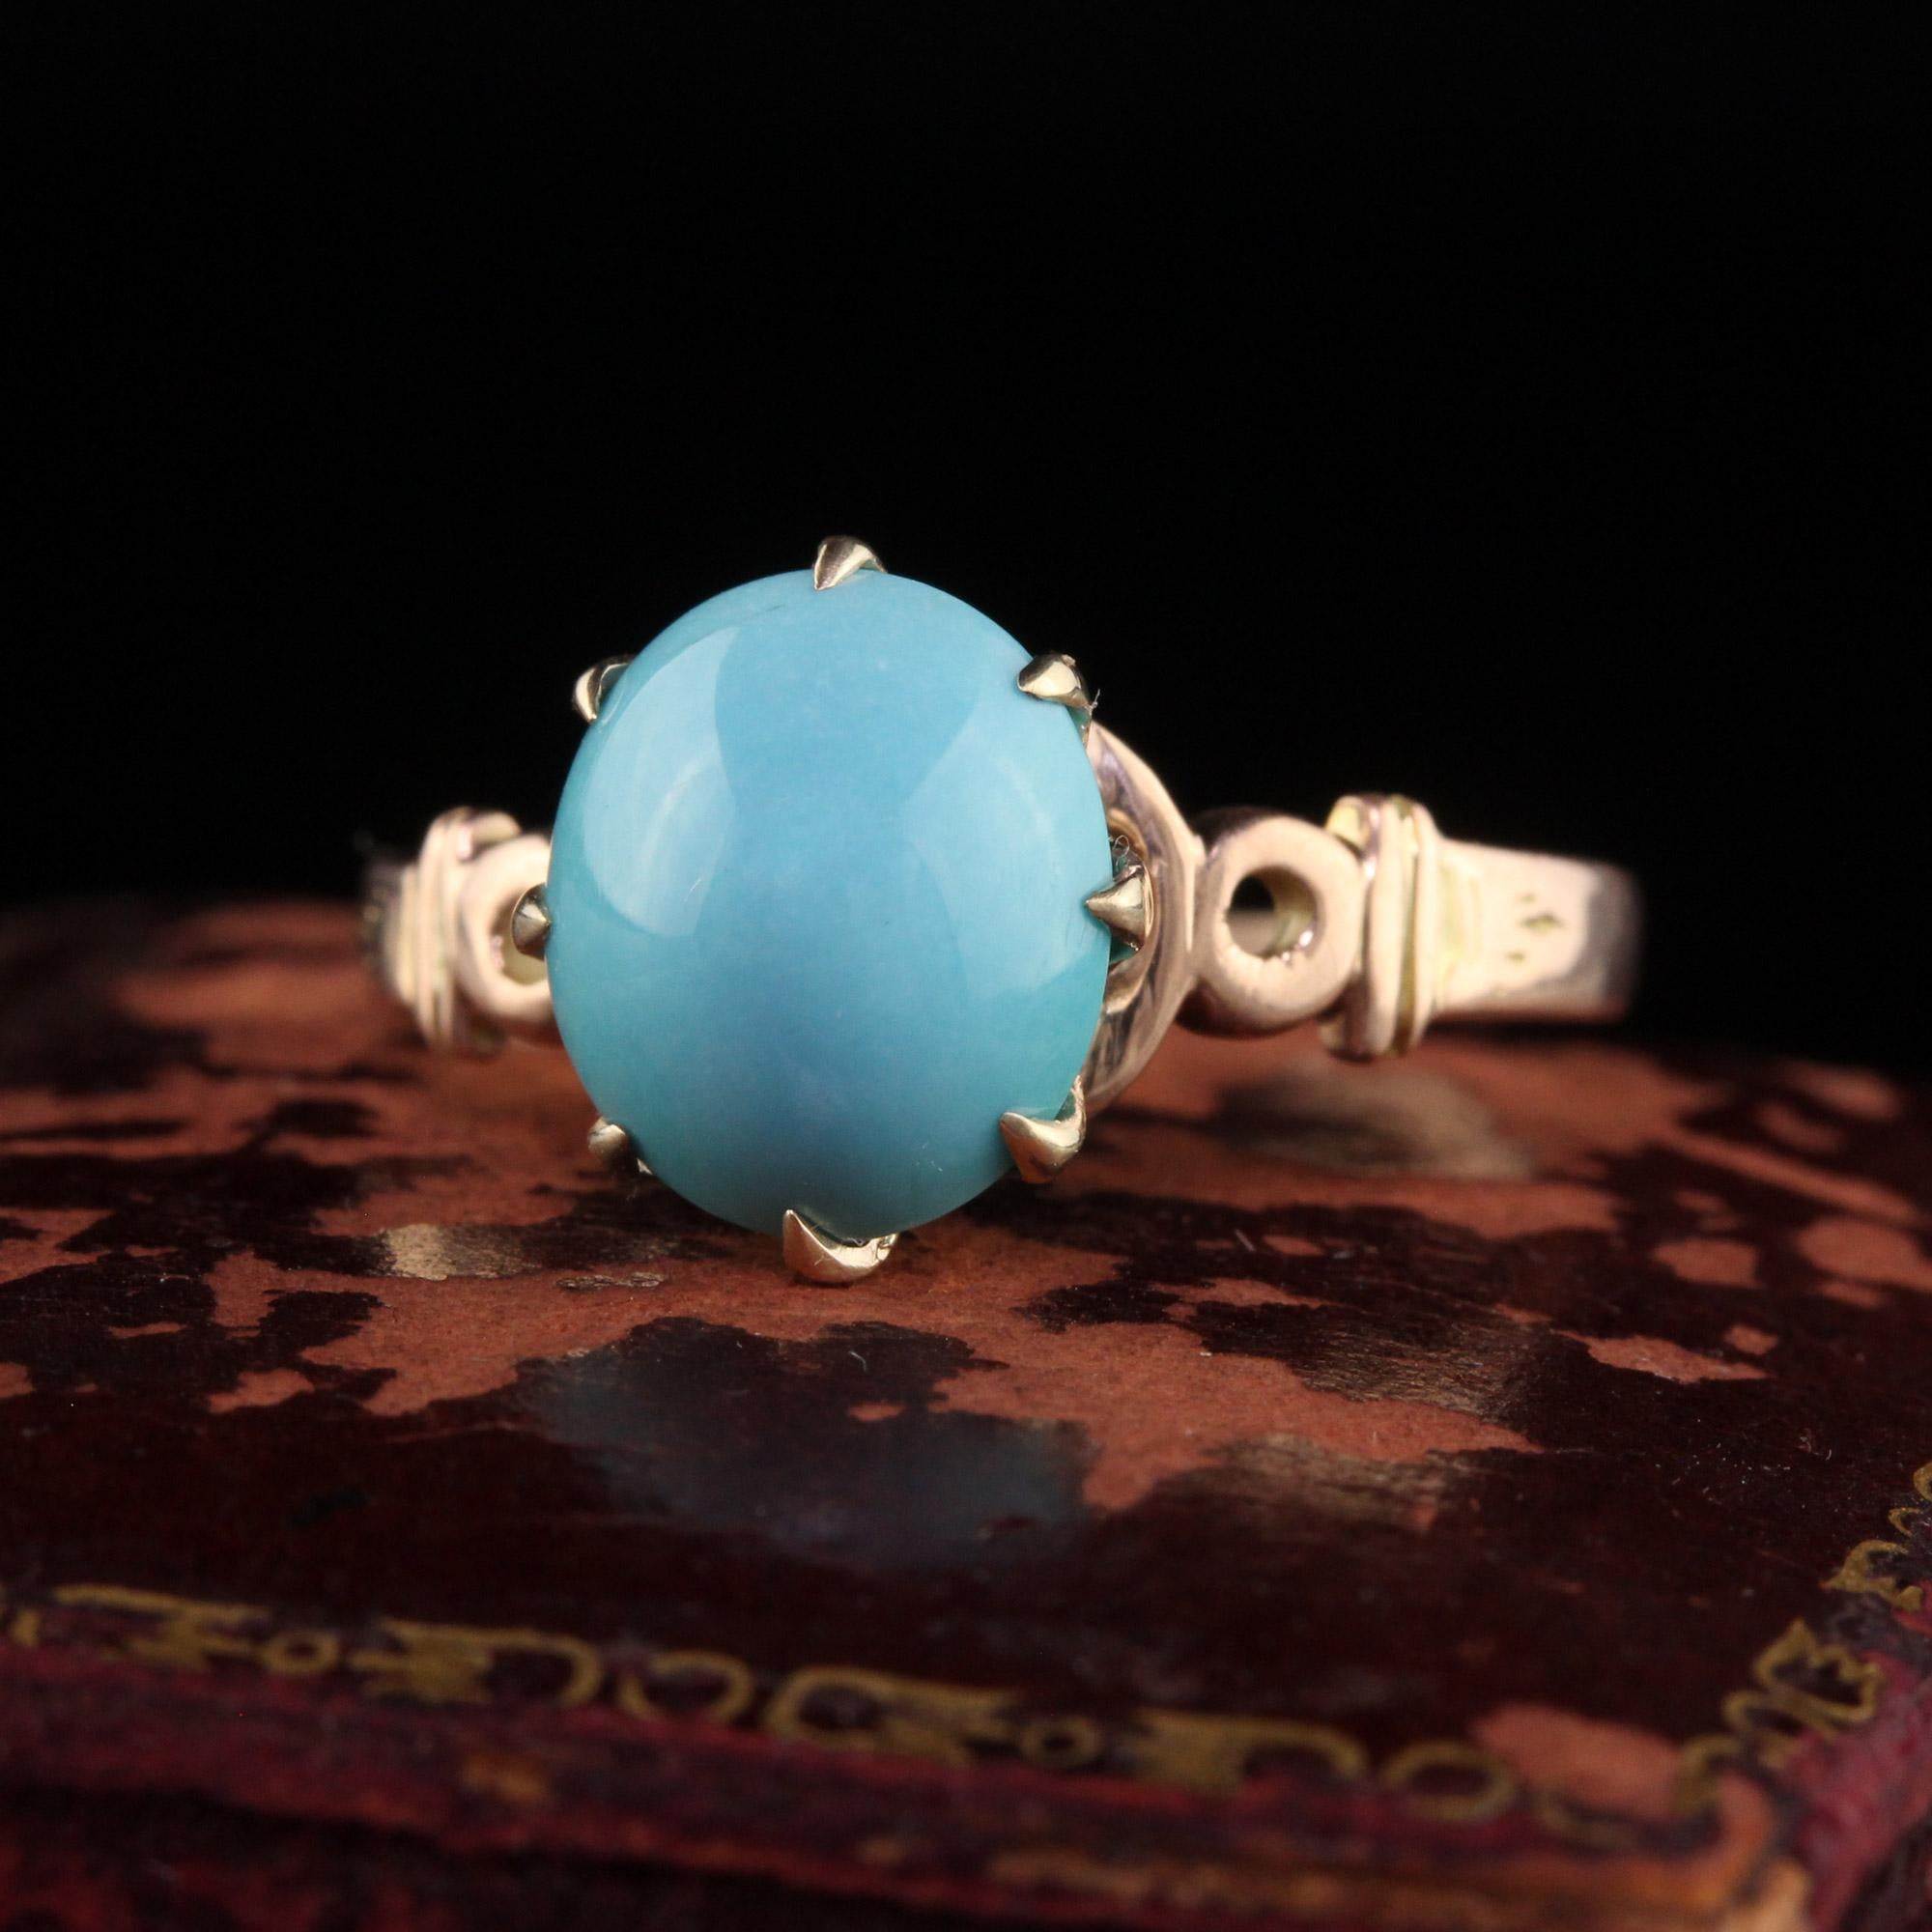 Beautiful Antique Victorian 14K Yellow Gold Cabochon Turquoise Engagement Ring. This gorgeous engagement ring is crafted in 14k yellow gold. The center holds a beautiful cabochon turquoise and has a beautiful blue color to it. The ring is in great